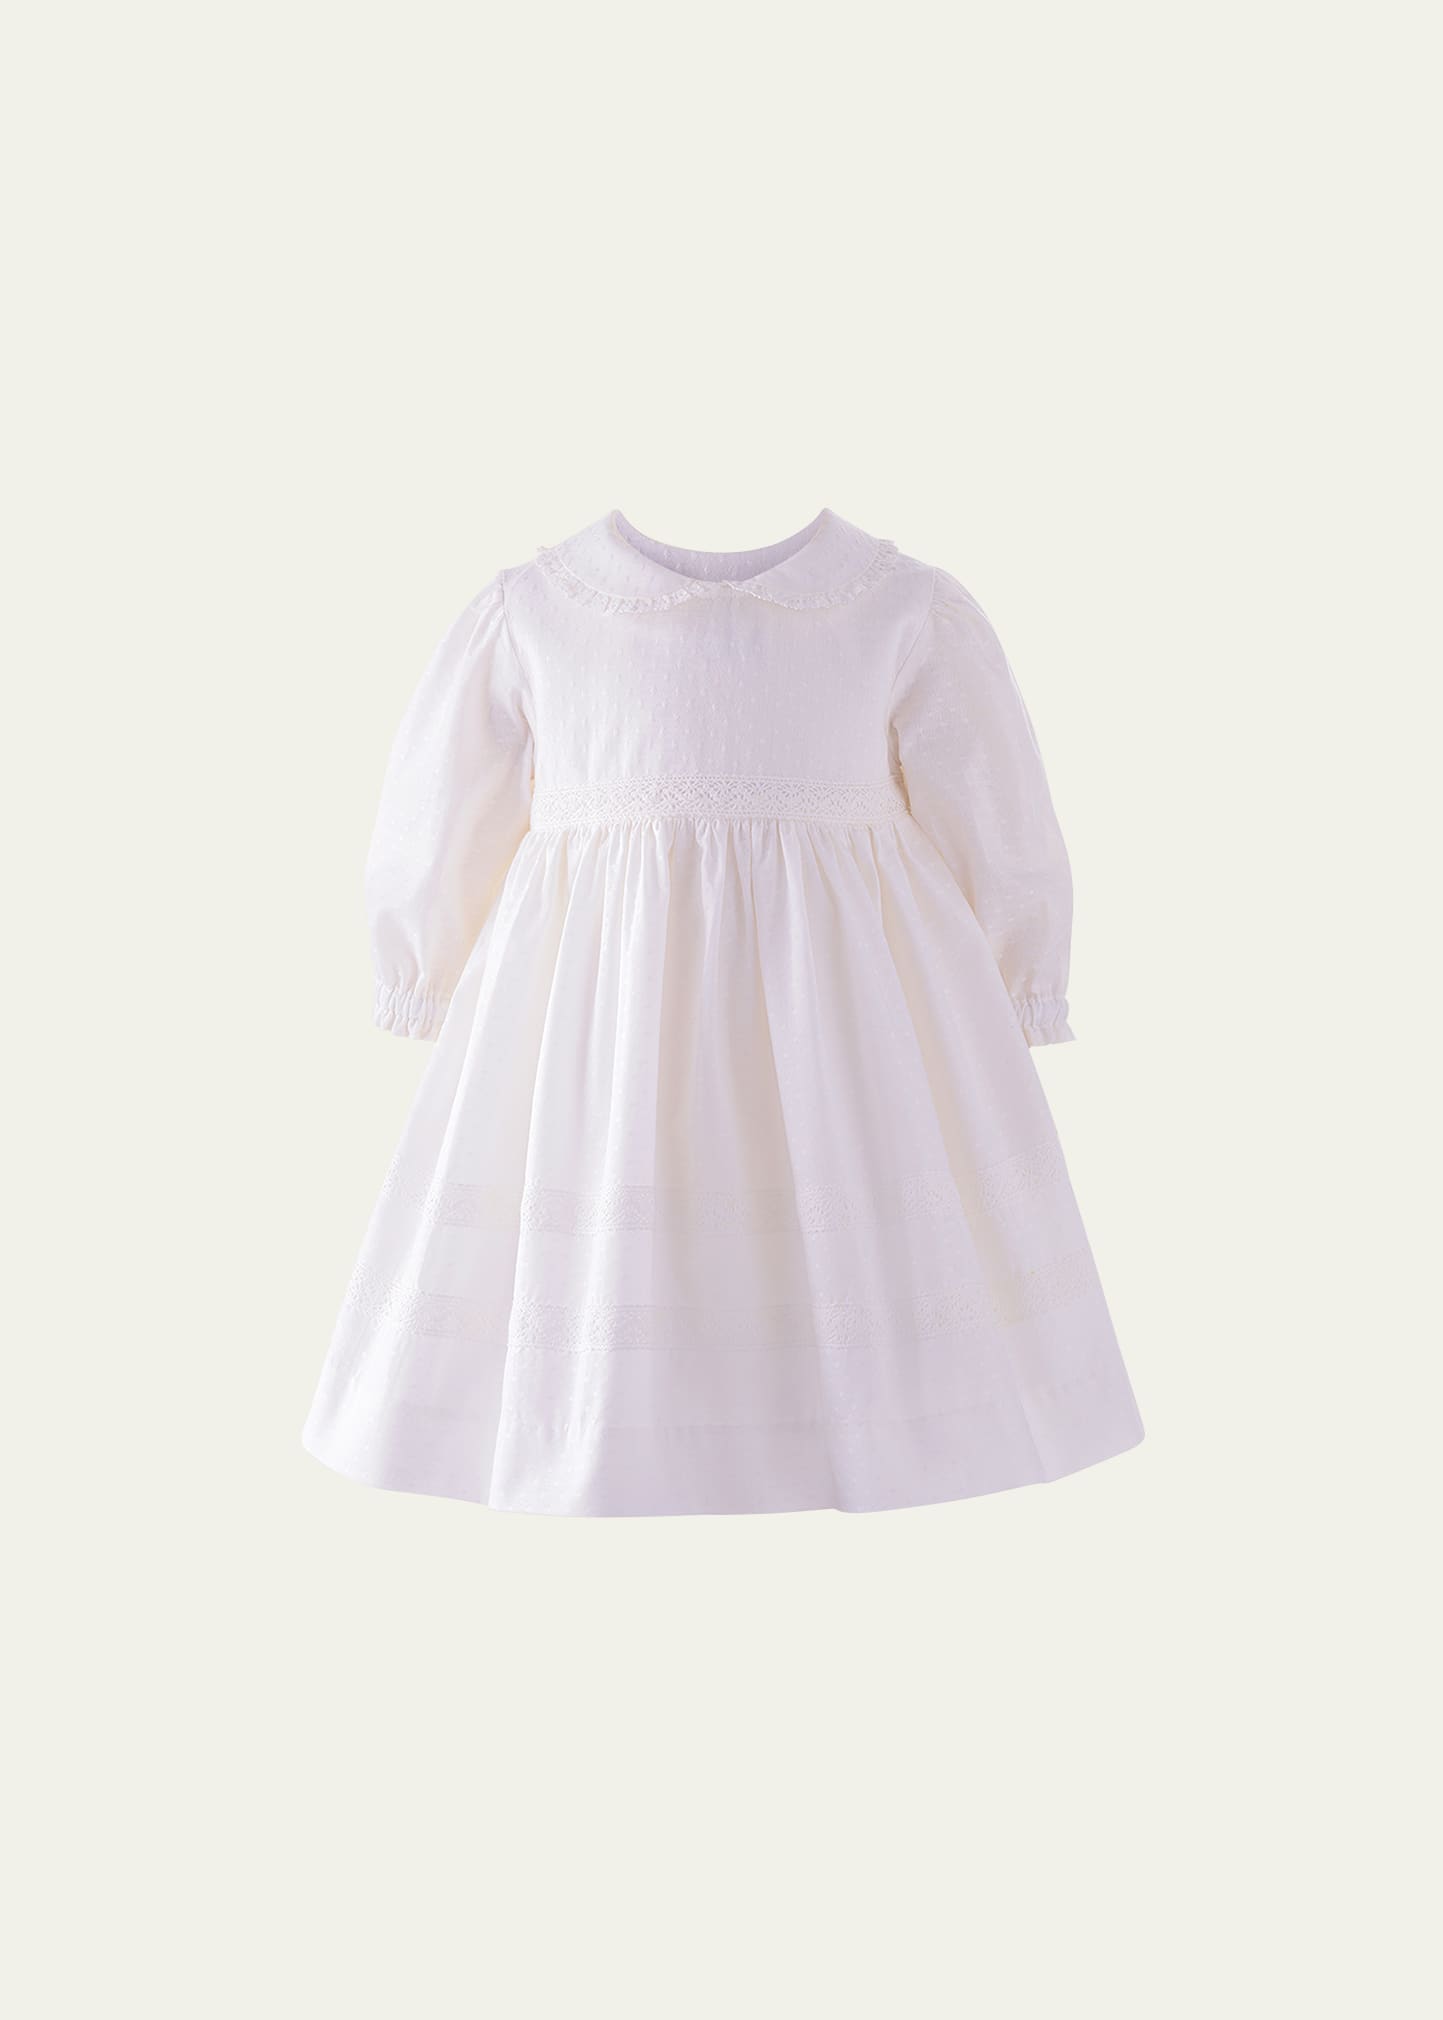 Girl's Lace Trim Dress W/ Bloomers, Size 6M-24M